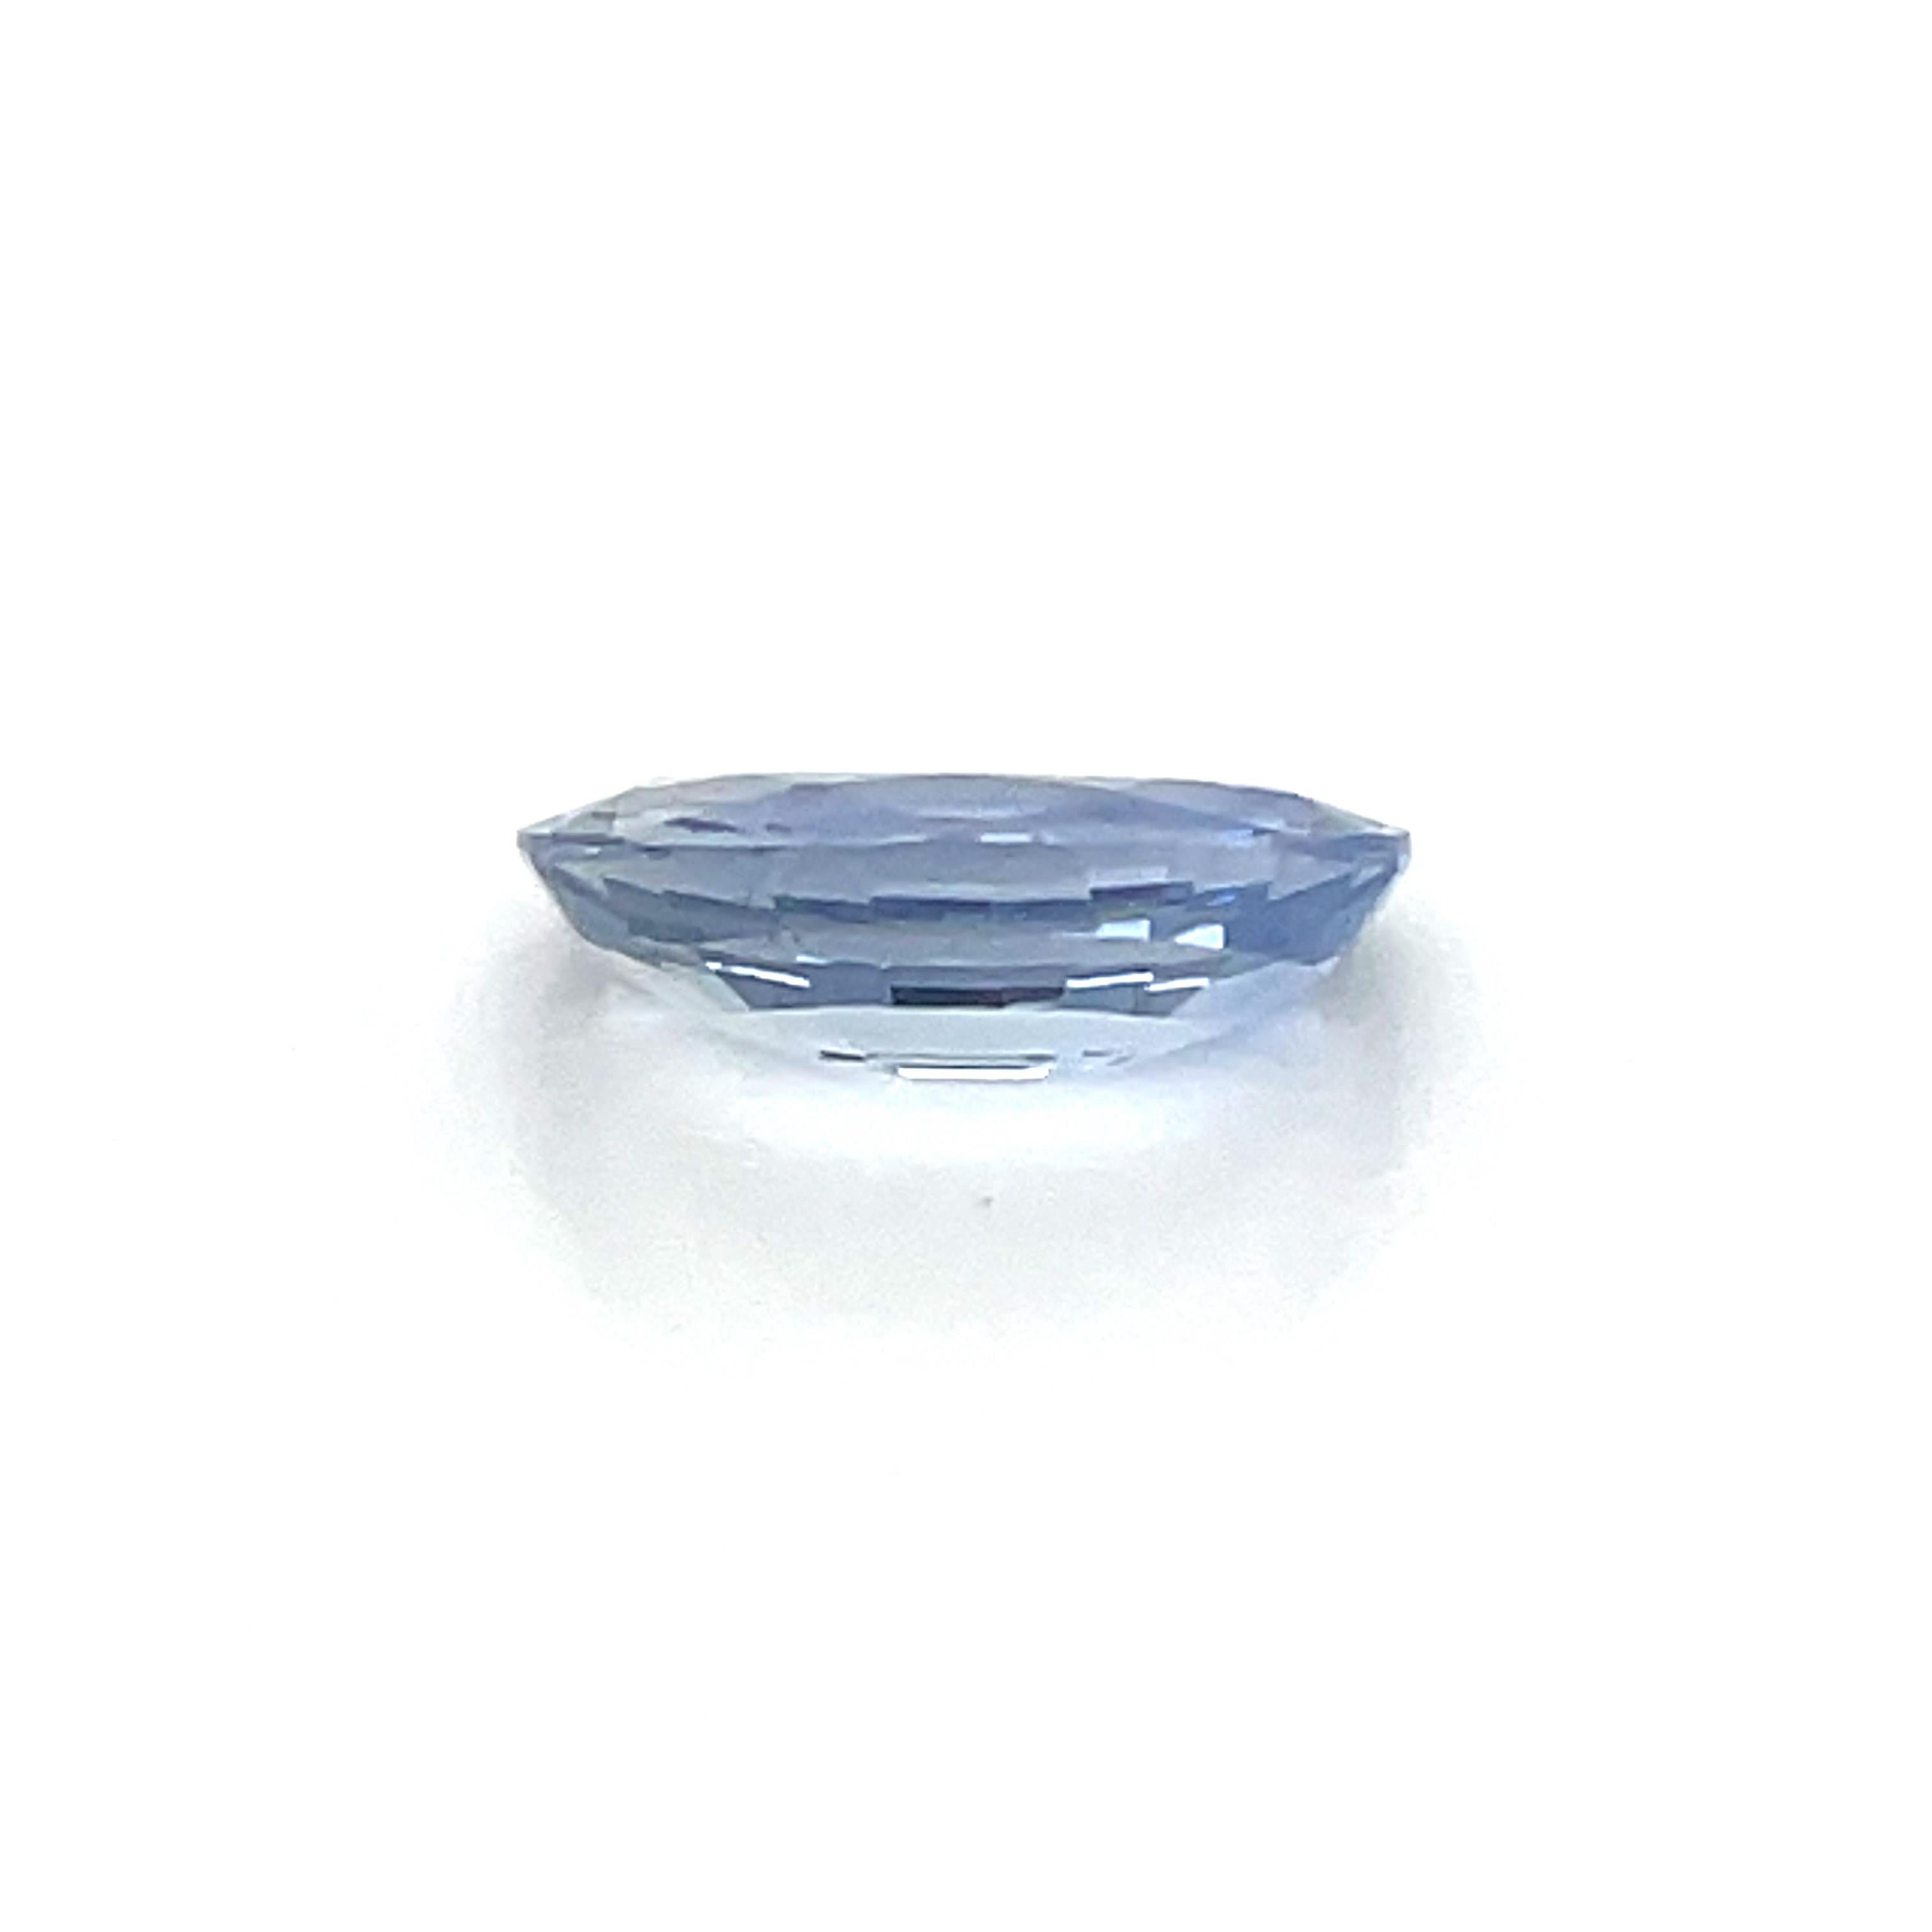 A captivating gemstone whose deep blue tones evoke the enchantment of the night sky. 

This 4.19 carat half-moon sapphire, which represents insight and understanding, is a classic piece that lends a sense of mystery to any jewelry